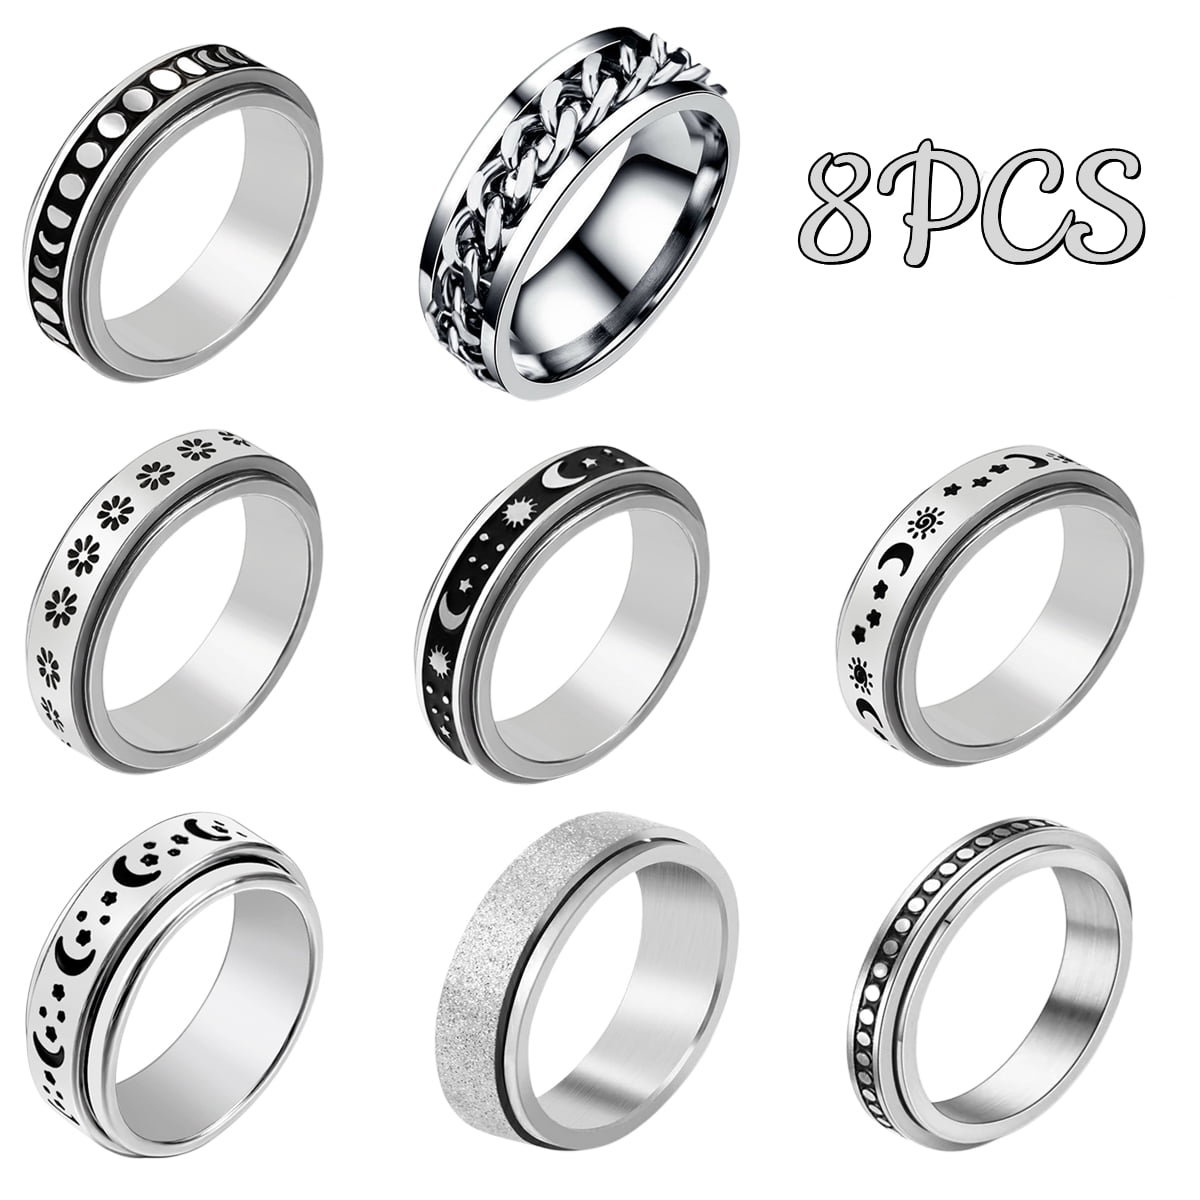 Spinner Ring Anxiety Rings Fidget Ring for Men and Women Size 8 ...